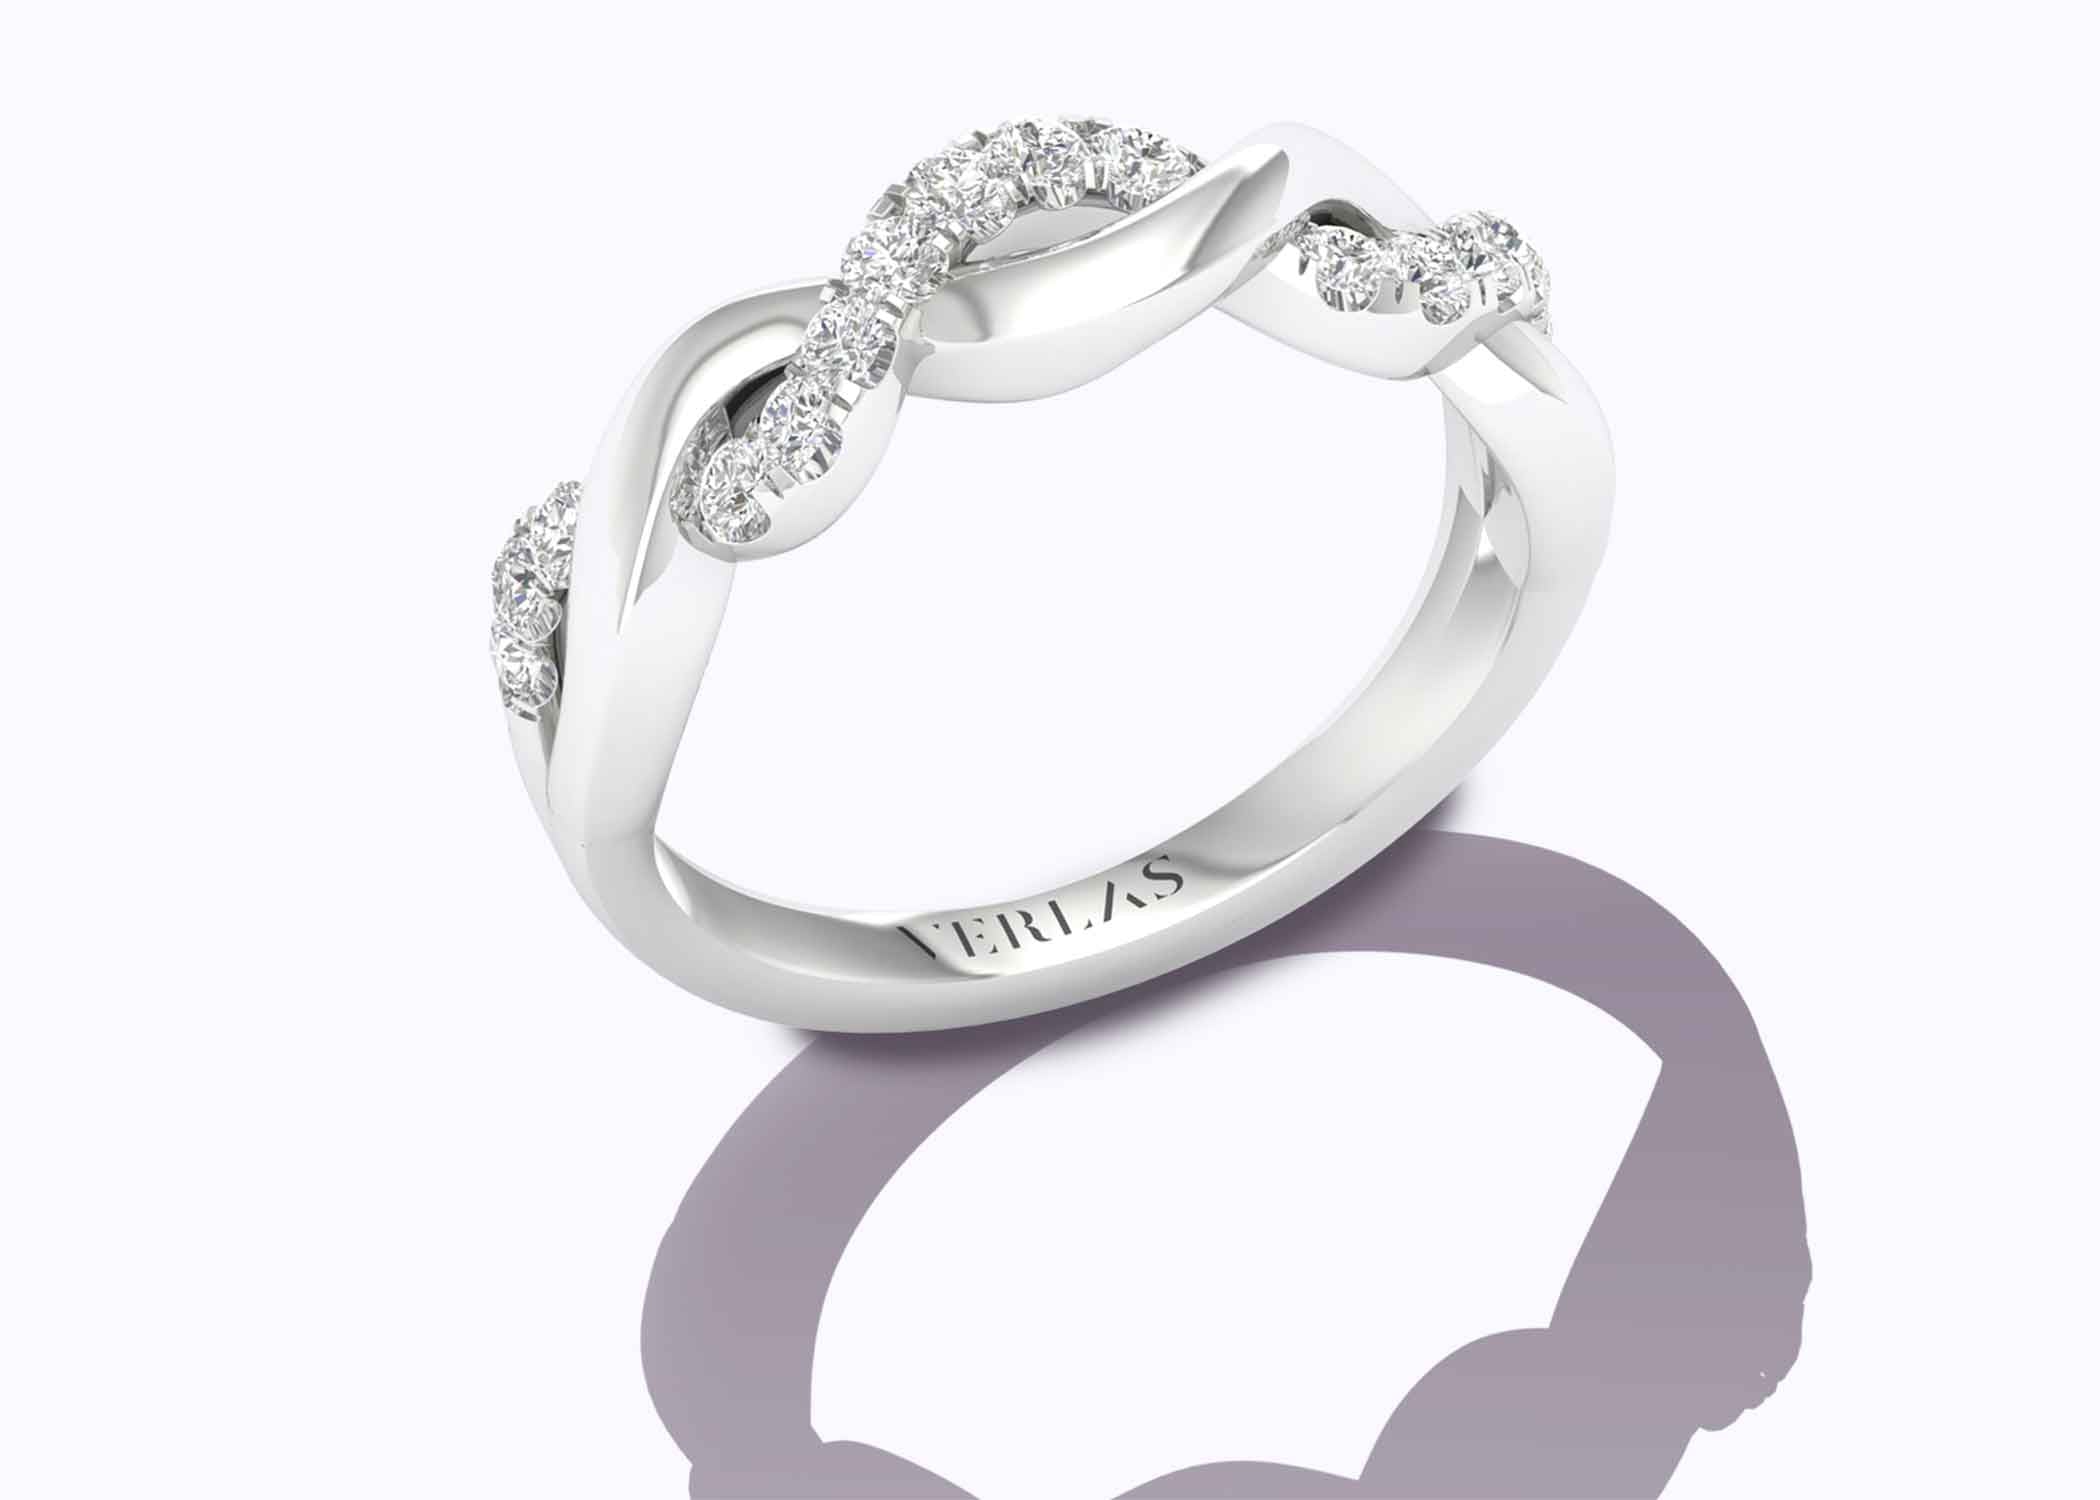 Entwined Braid Ring - Ring 